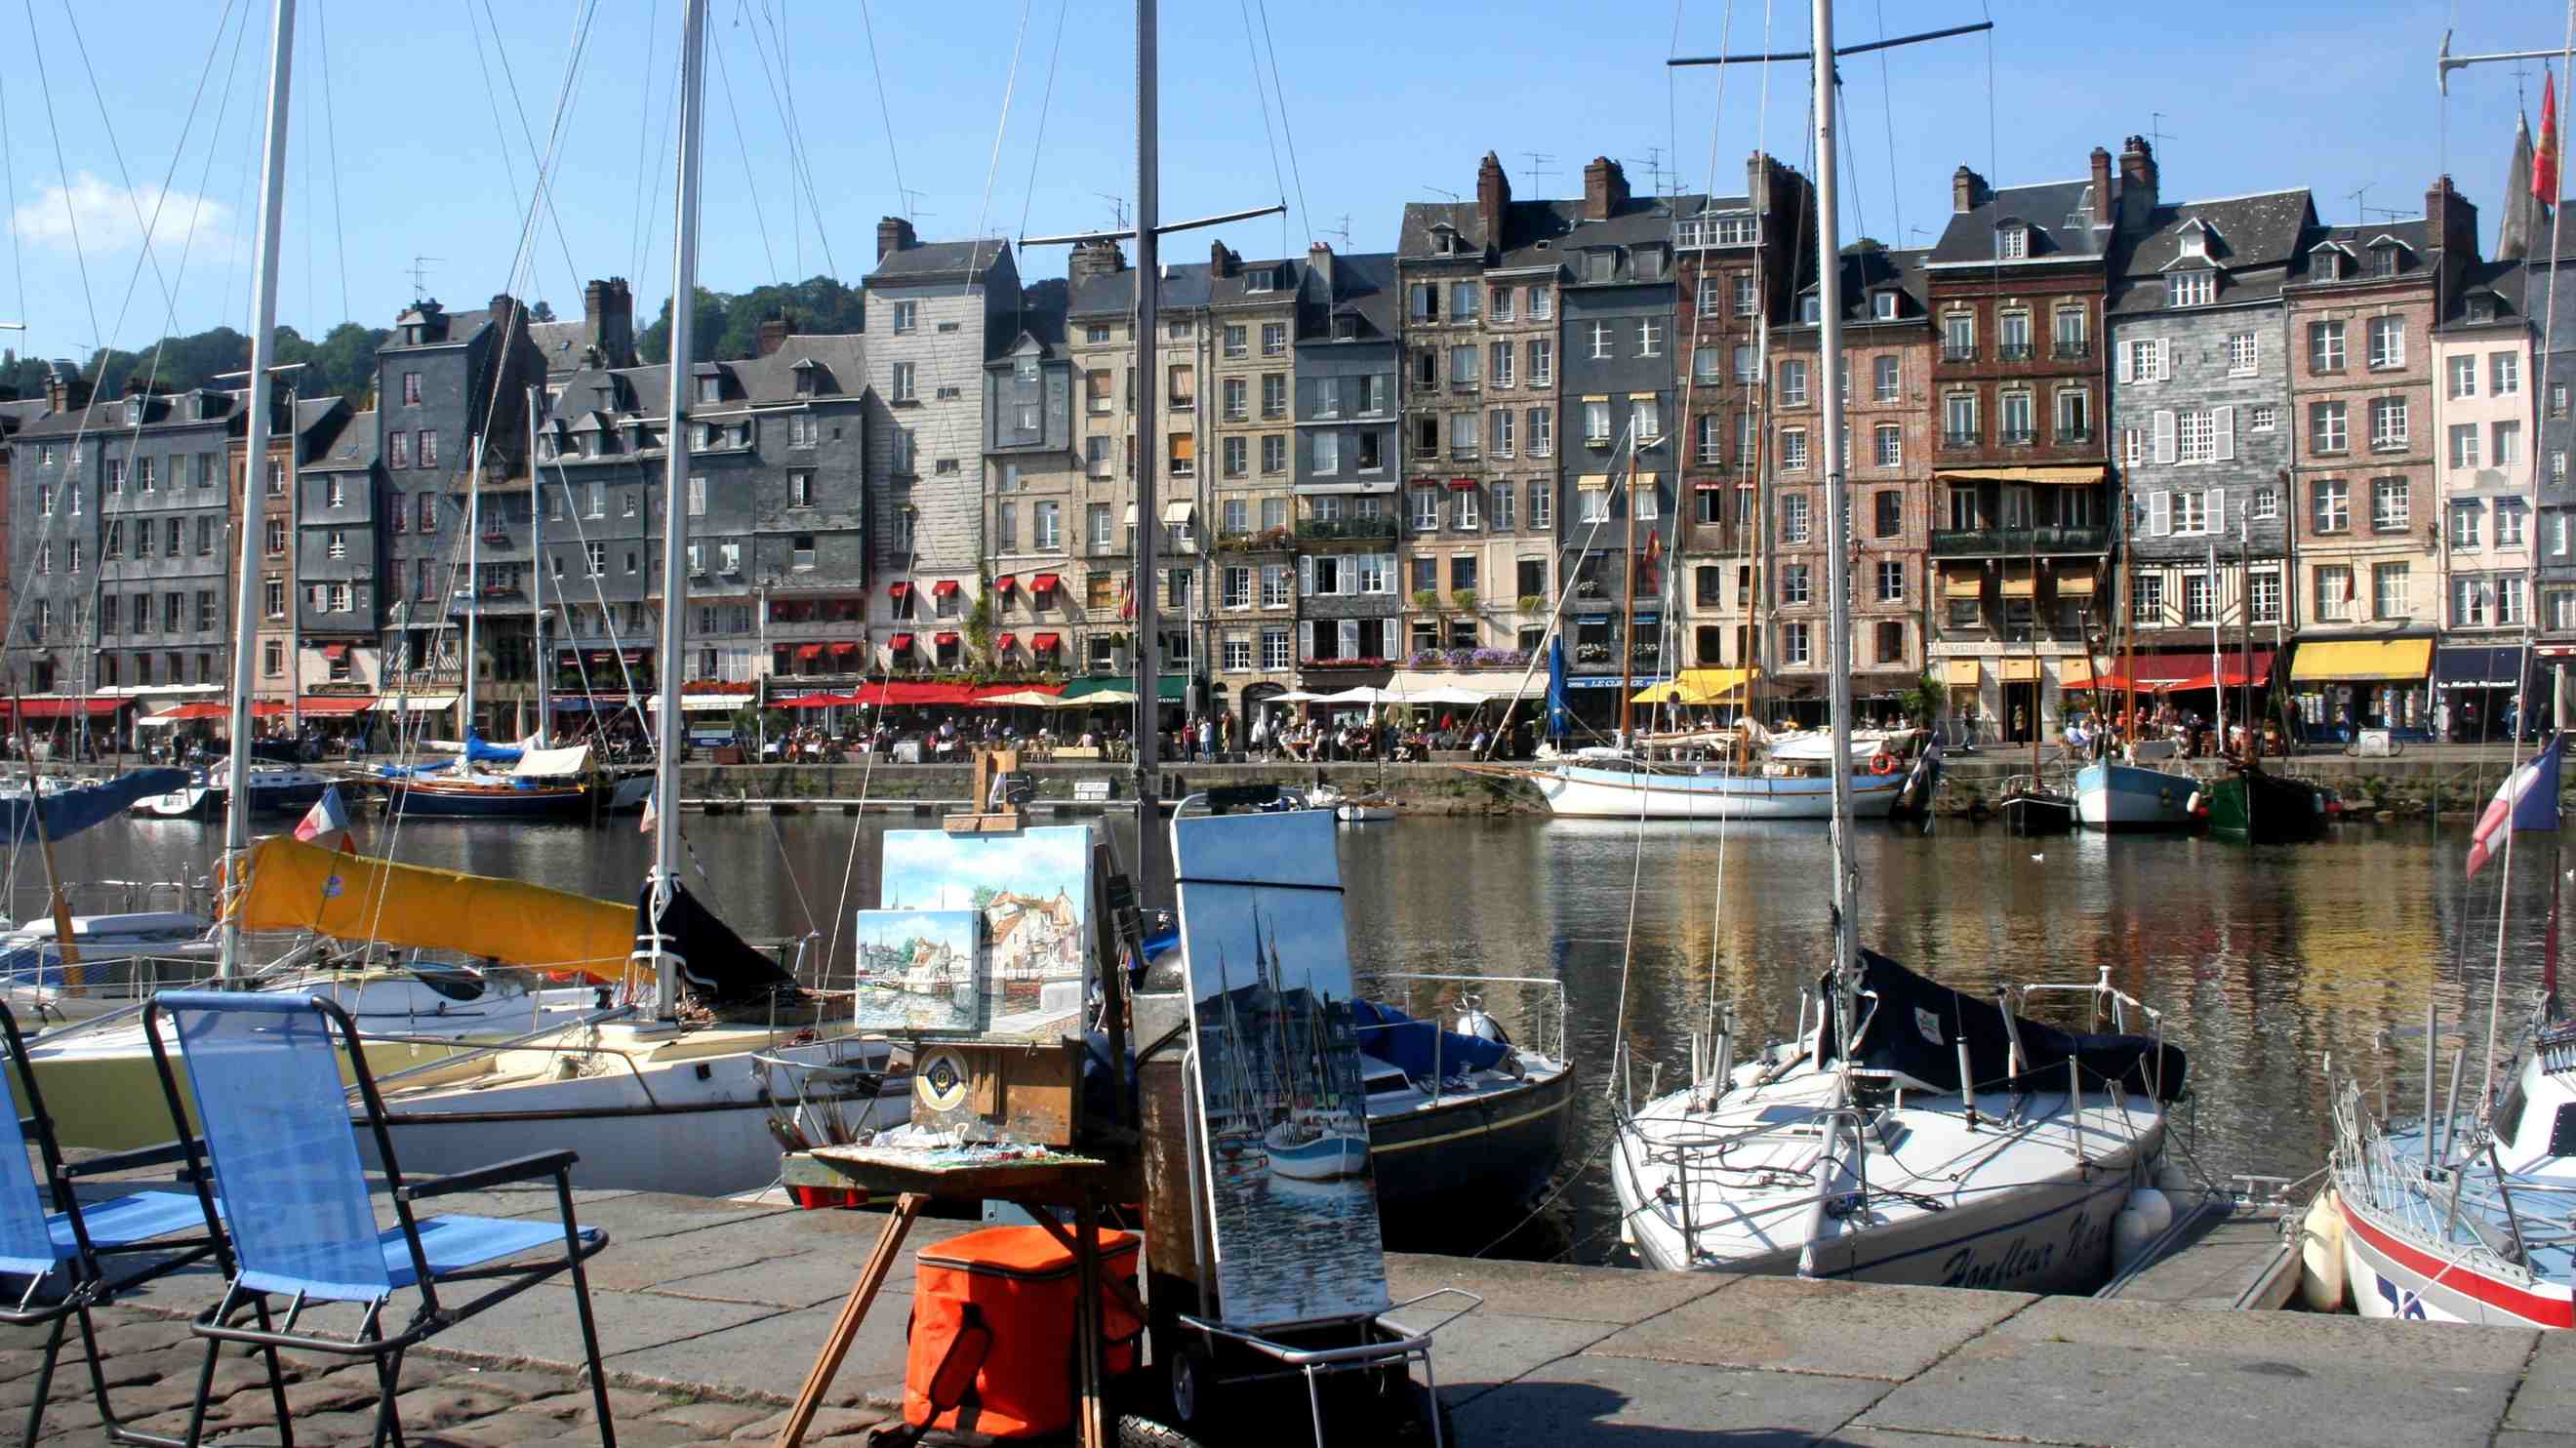 10 Best Hotels Closest to Eugene Boudin Museum in Honfleur for 2018 ...